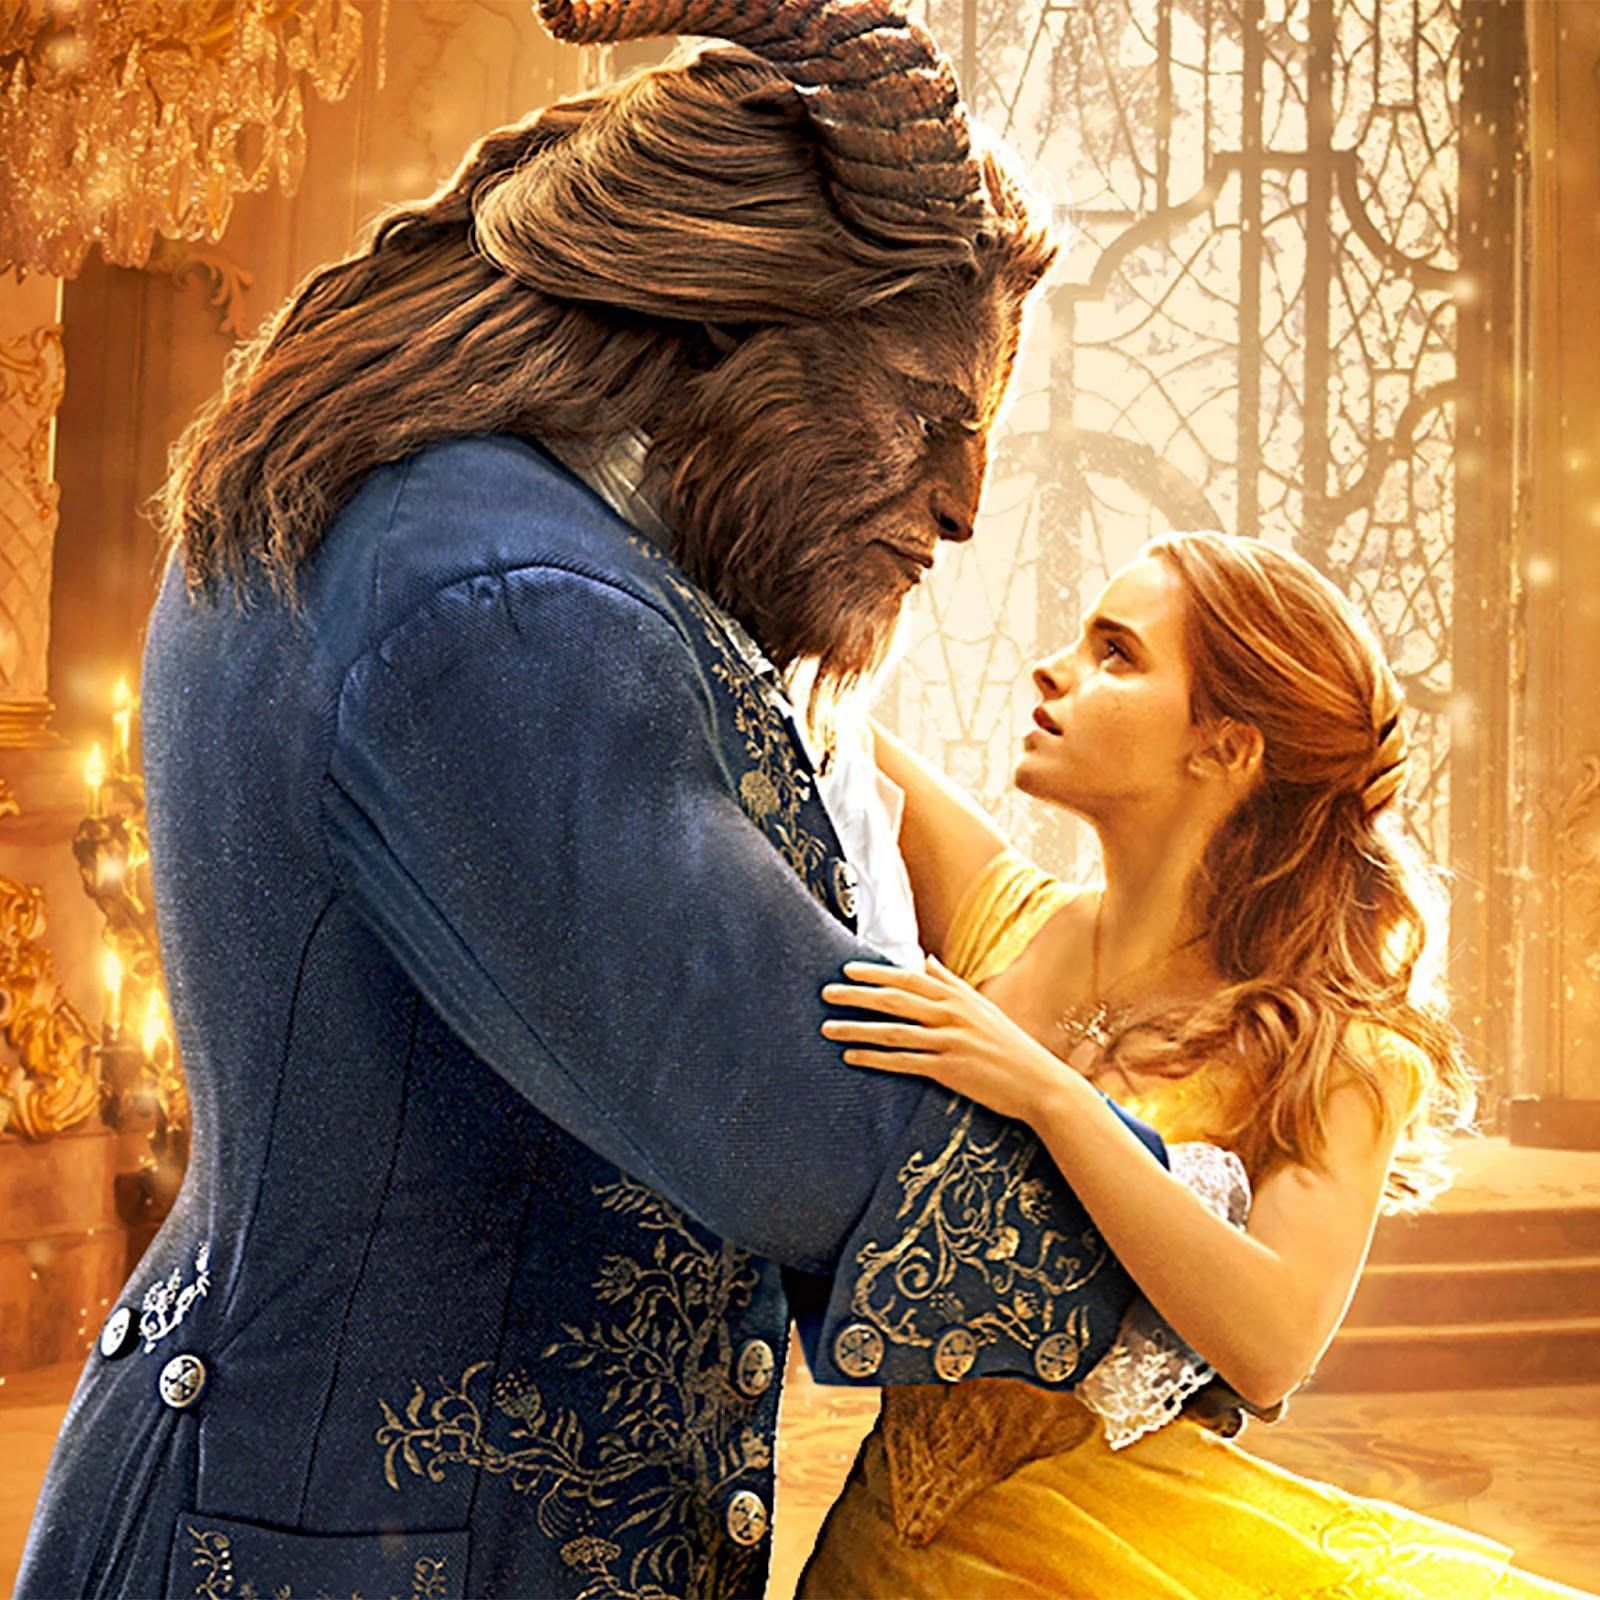 What is Beauty and The Beast about?